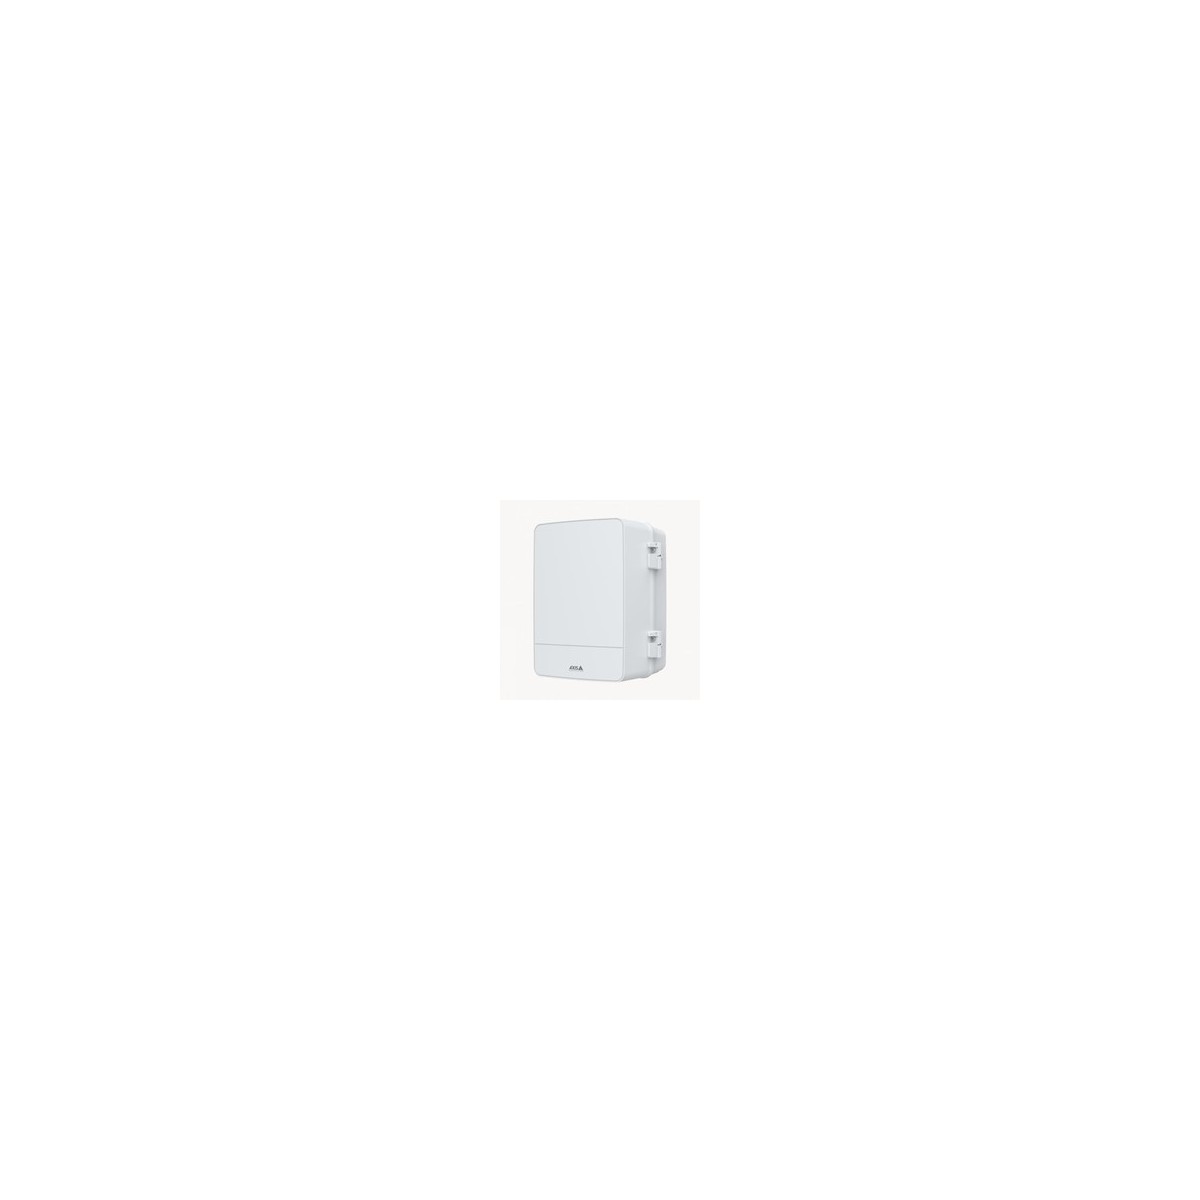 Axis 02359-001 - Surveillance cabinet - White - Axis - Polycarbonate (PC) - Stainless steel - 282 mm - 229 mm